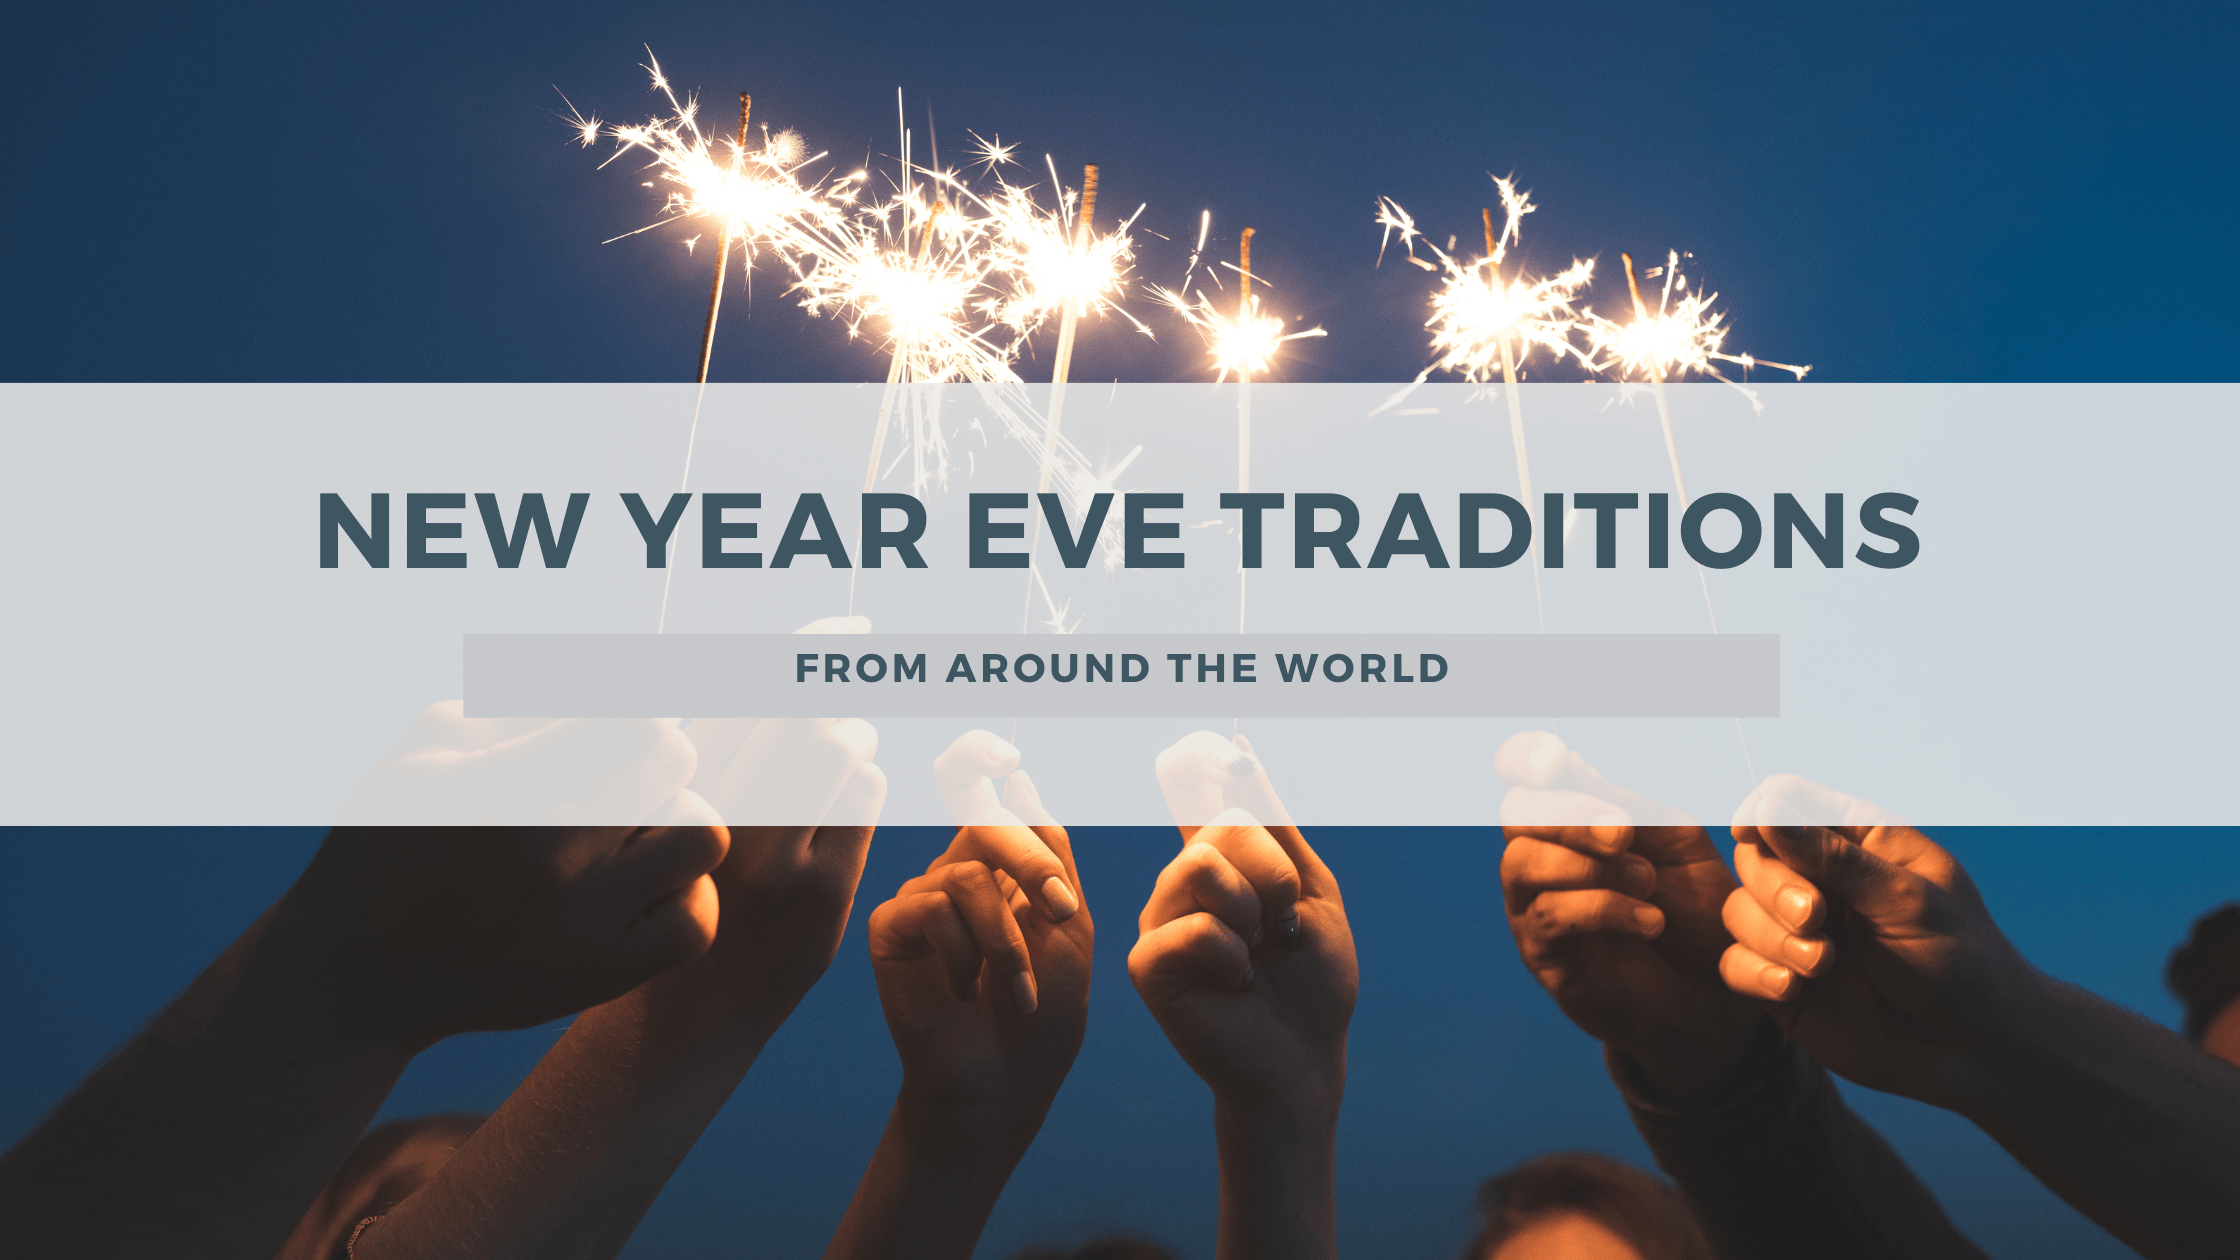 10 New Year Eve’s Traditions from Around the World